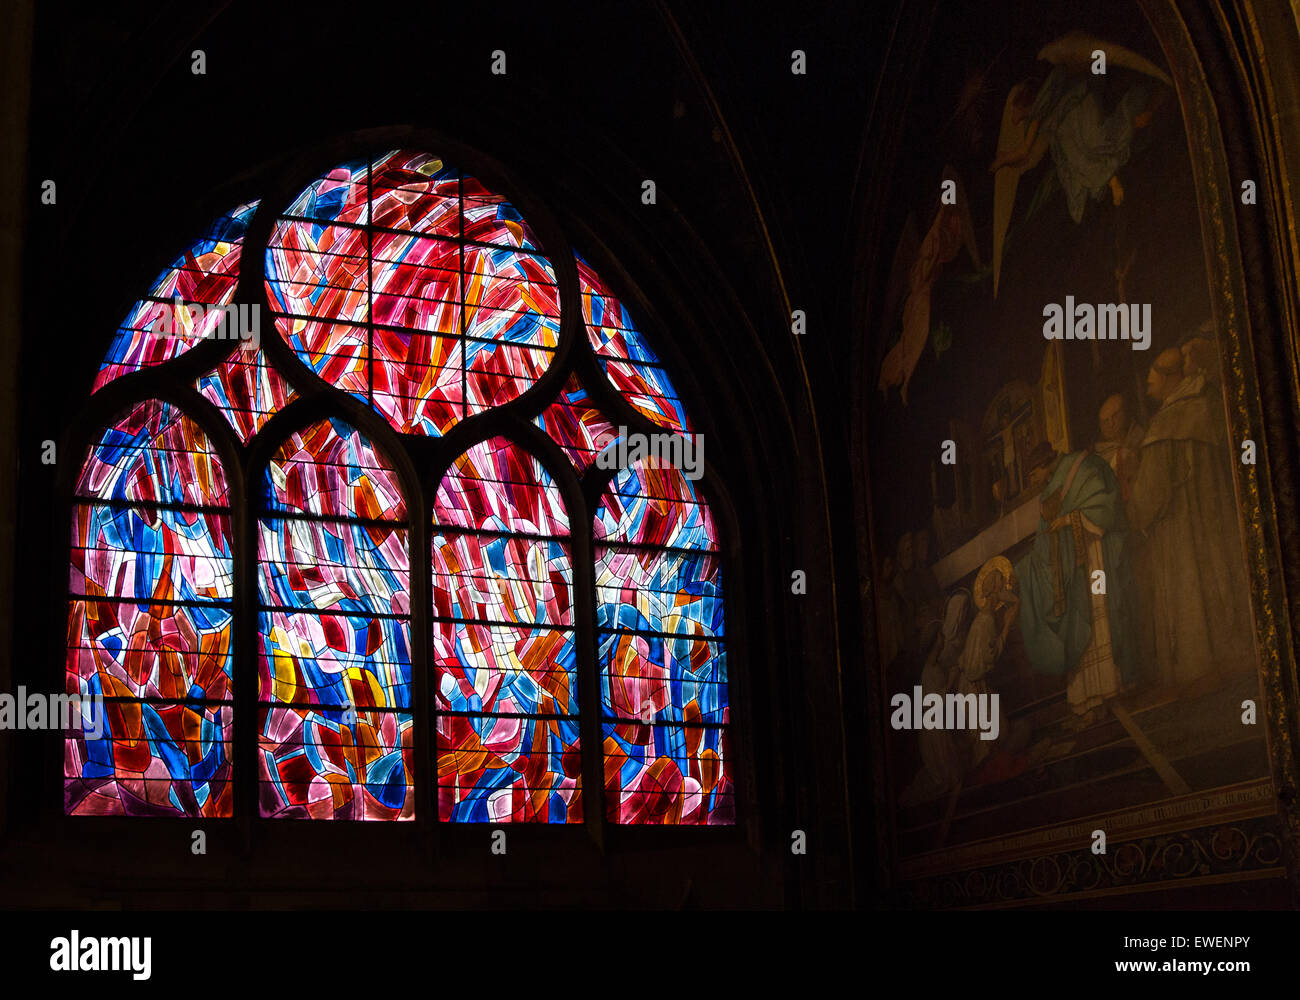 One of a series of stain glass windows in Saint-Severin designed  by Jean Rene Bazaine. Stock Photo